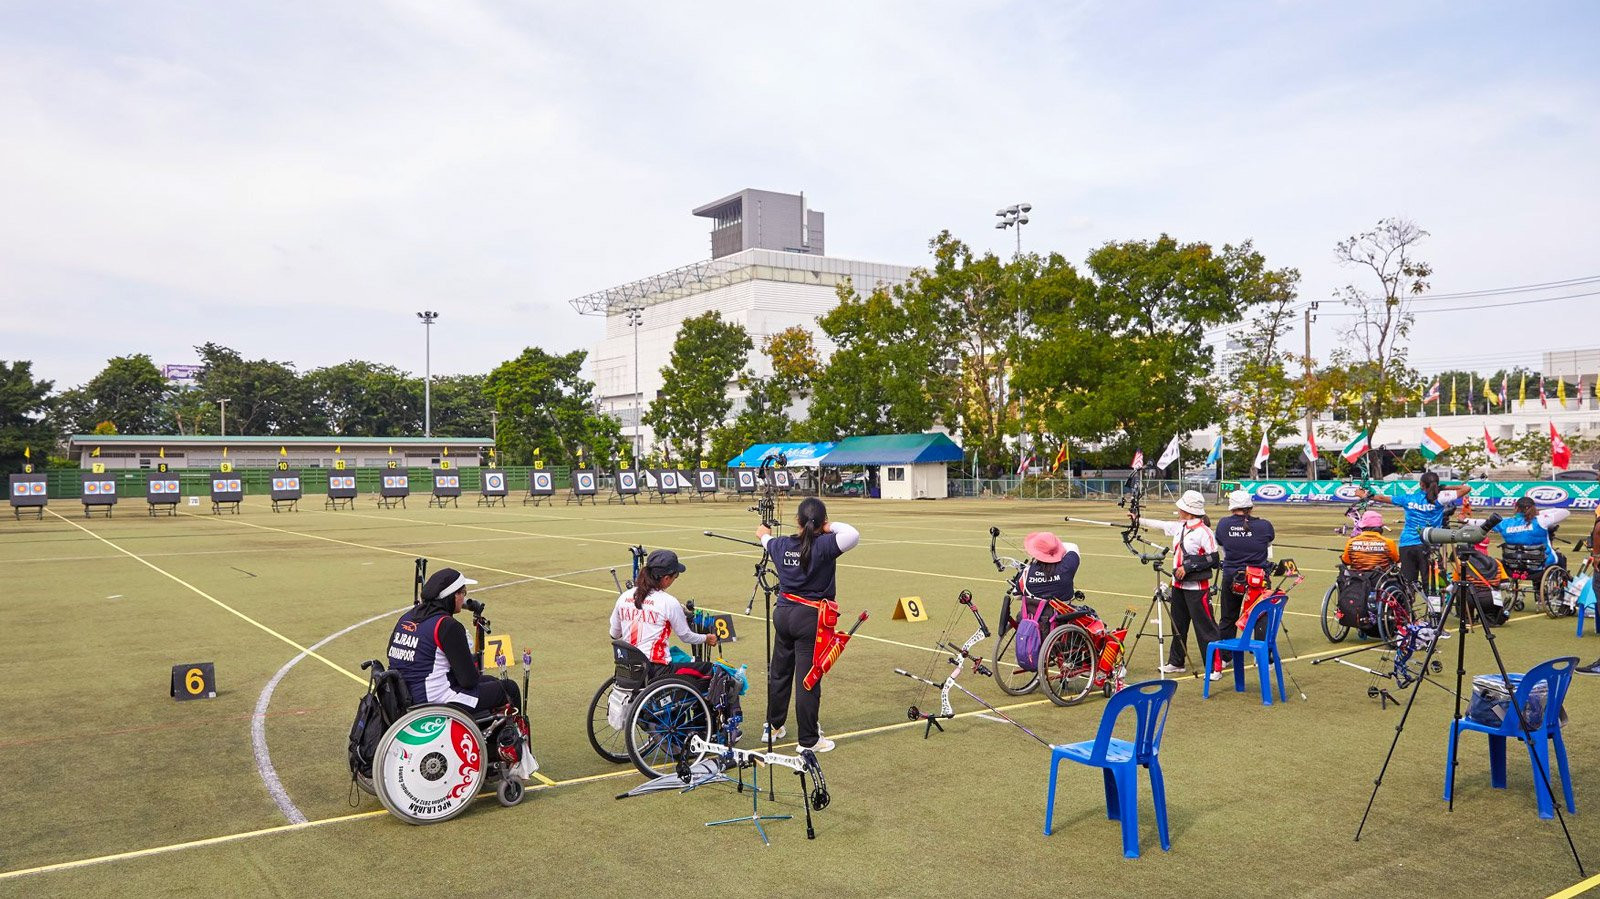 China booked their spots in the mixed recurve and compound women's finals as the team knockout stage began at the Asian Para Archery Championships ©World Archery